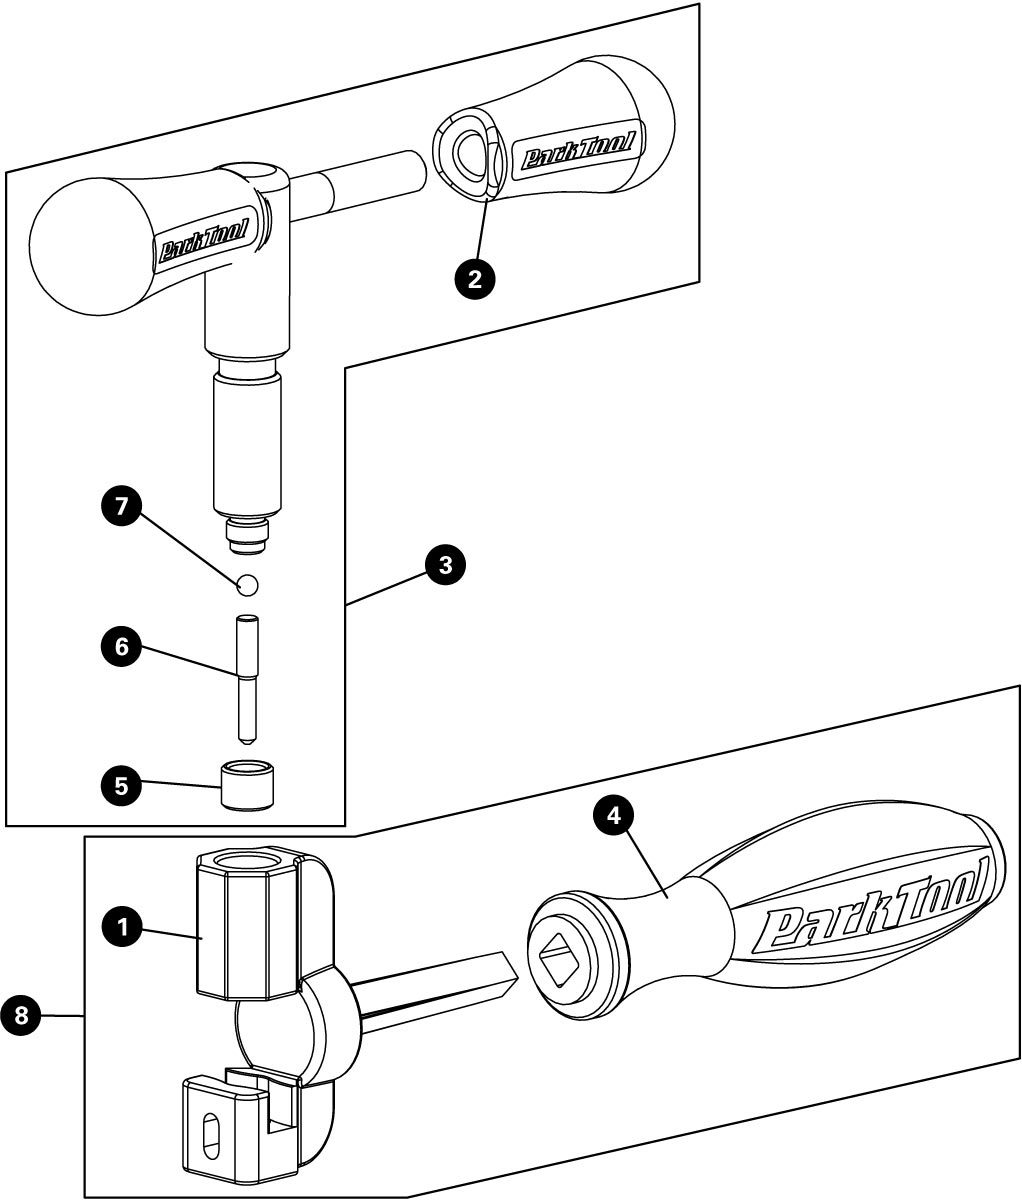 Parts diagram for CT-4.2 Master Chain Tool, enlarged